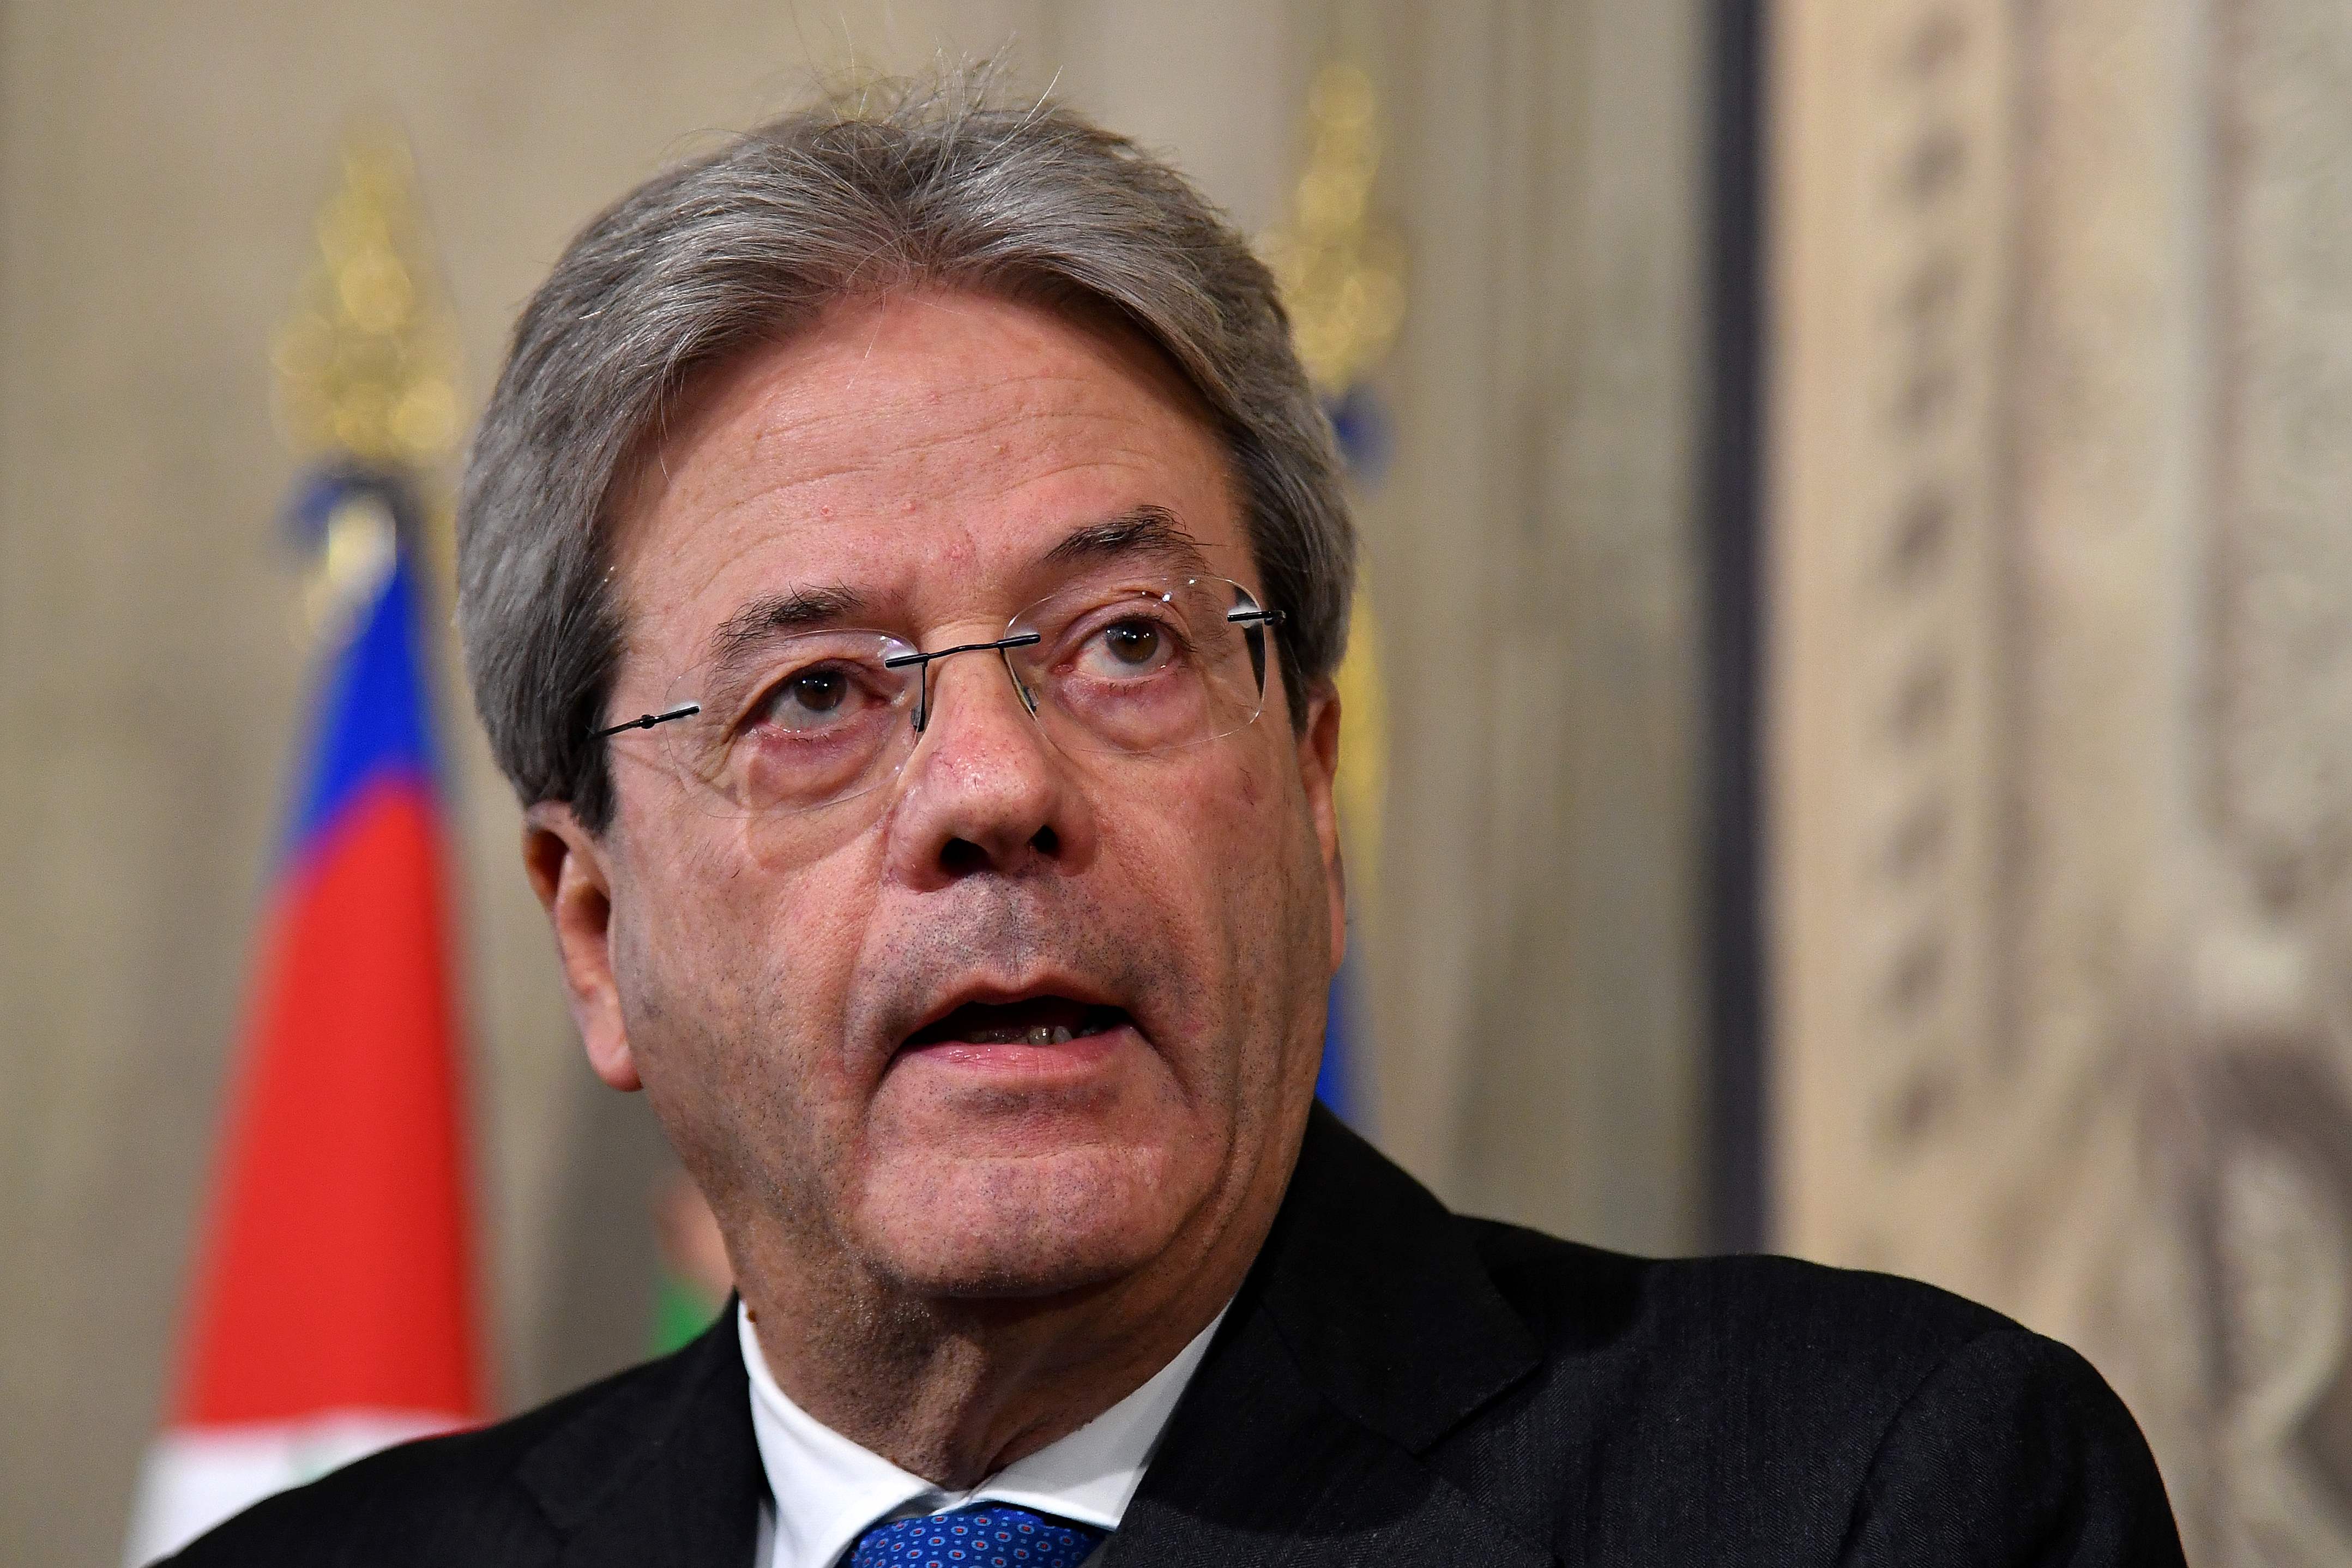 Italian Foreign Minister Gentiloni tries to form government